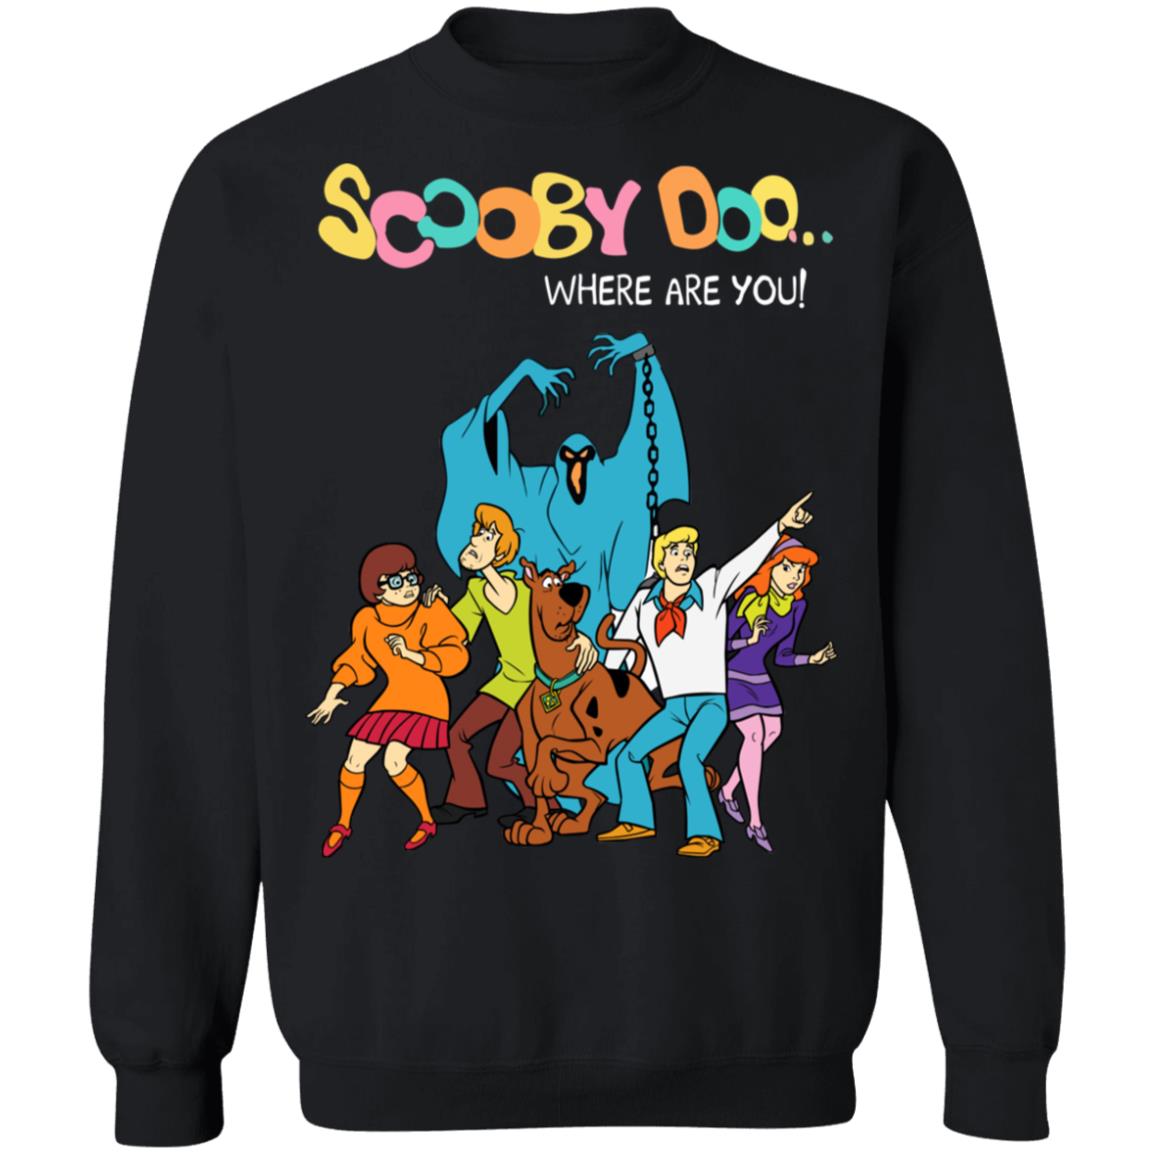 Scooby Doo Green Ghost Where Are You Shirt 21